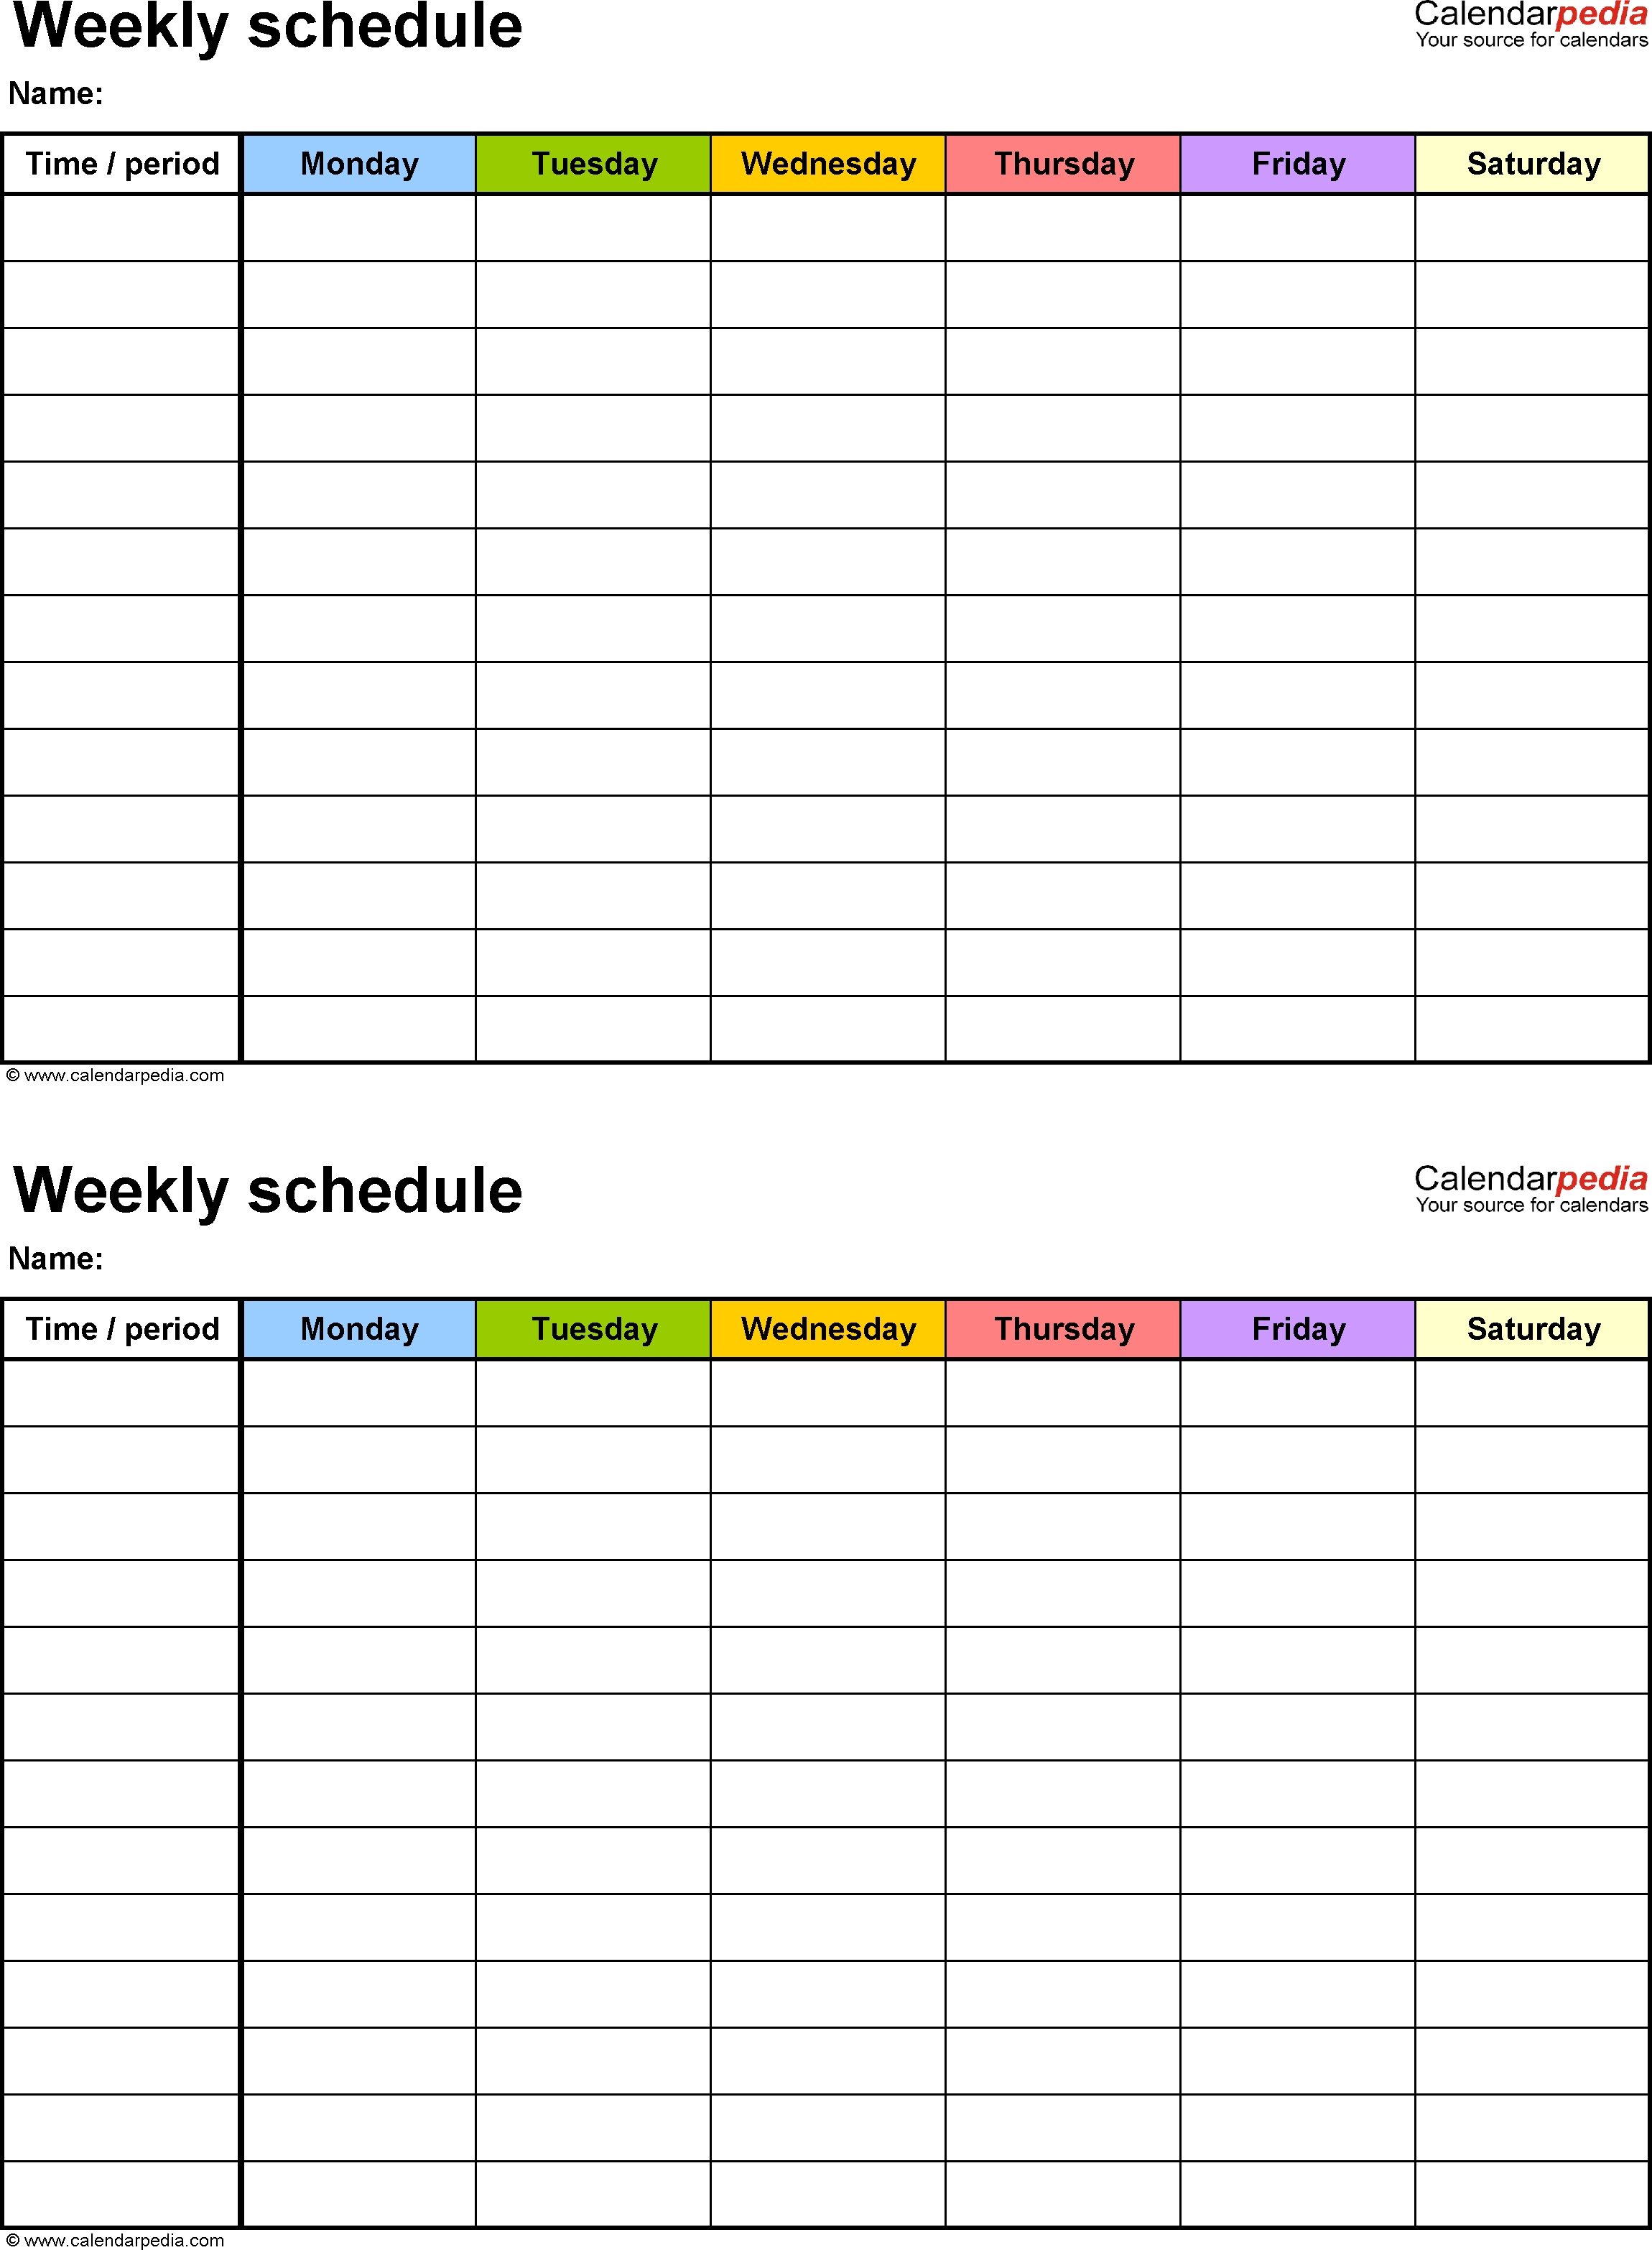 Free Weekly Schedule Templates For Word - 18 Templates throughout Printable 2 Week Calendar Template